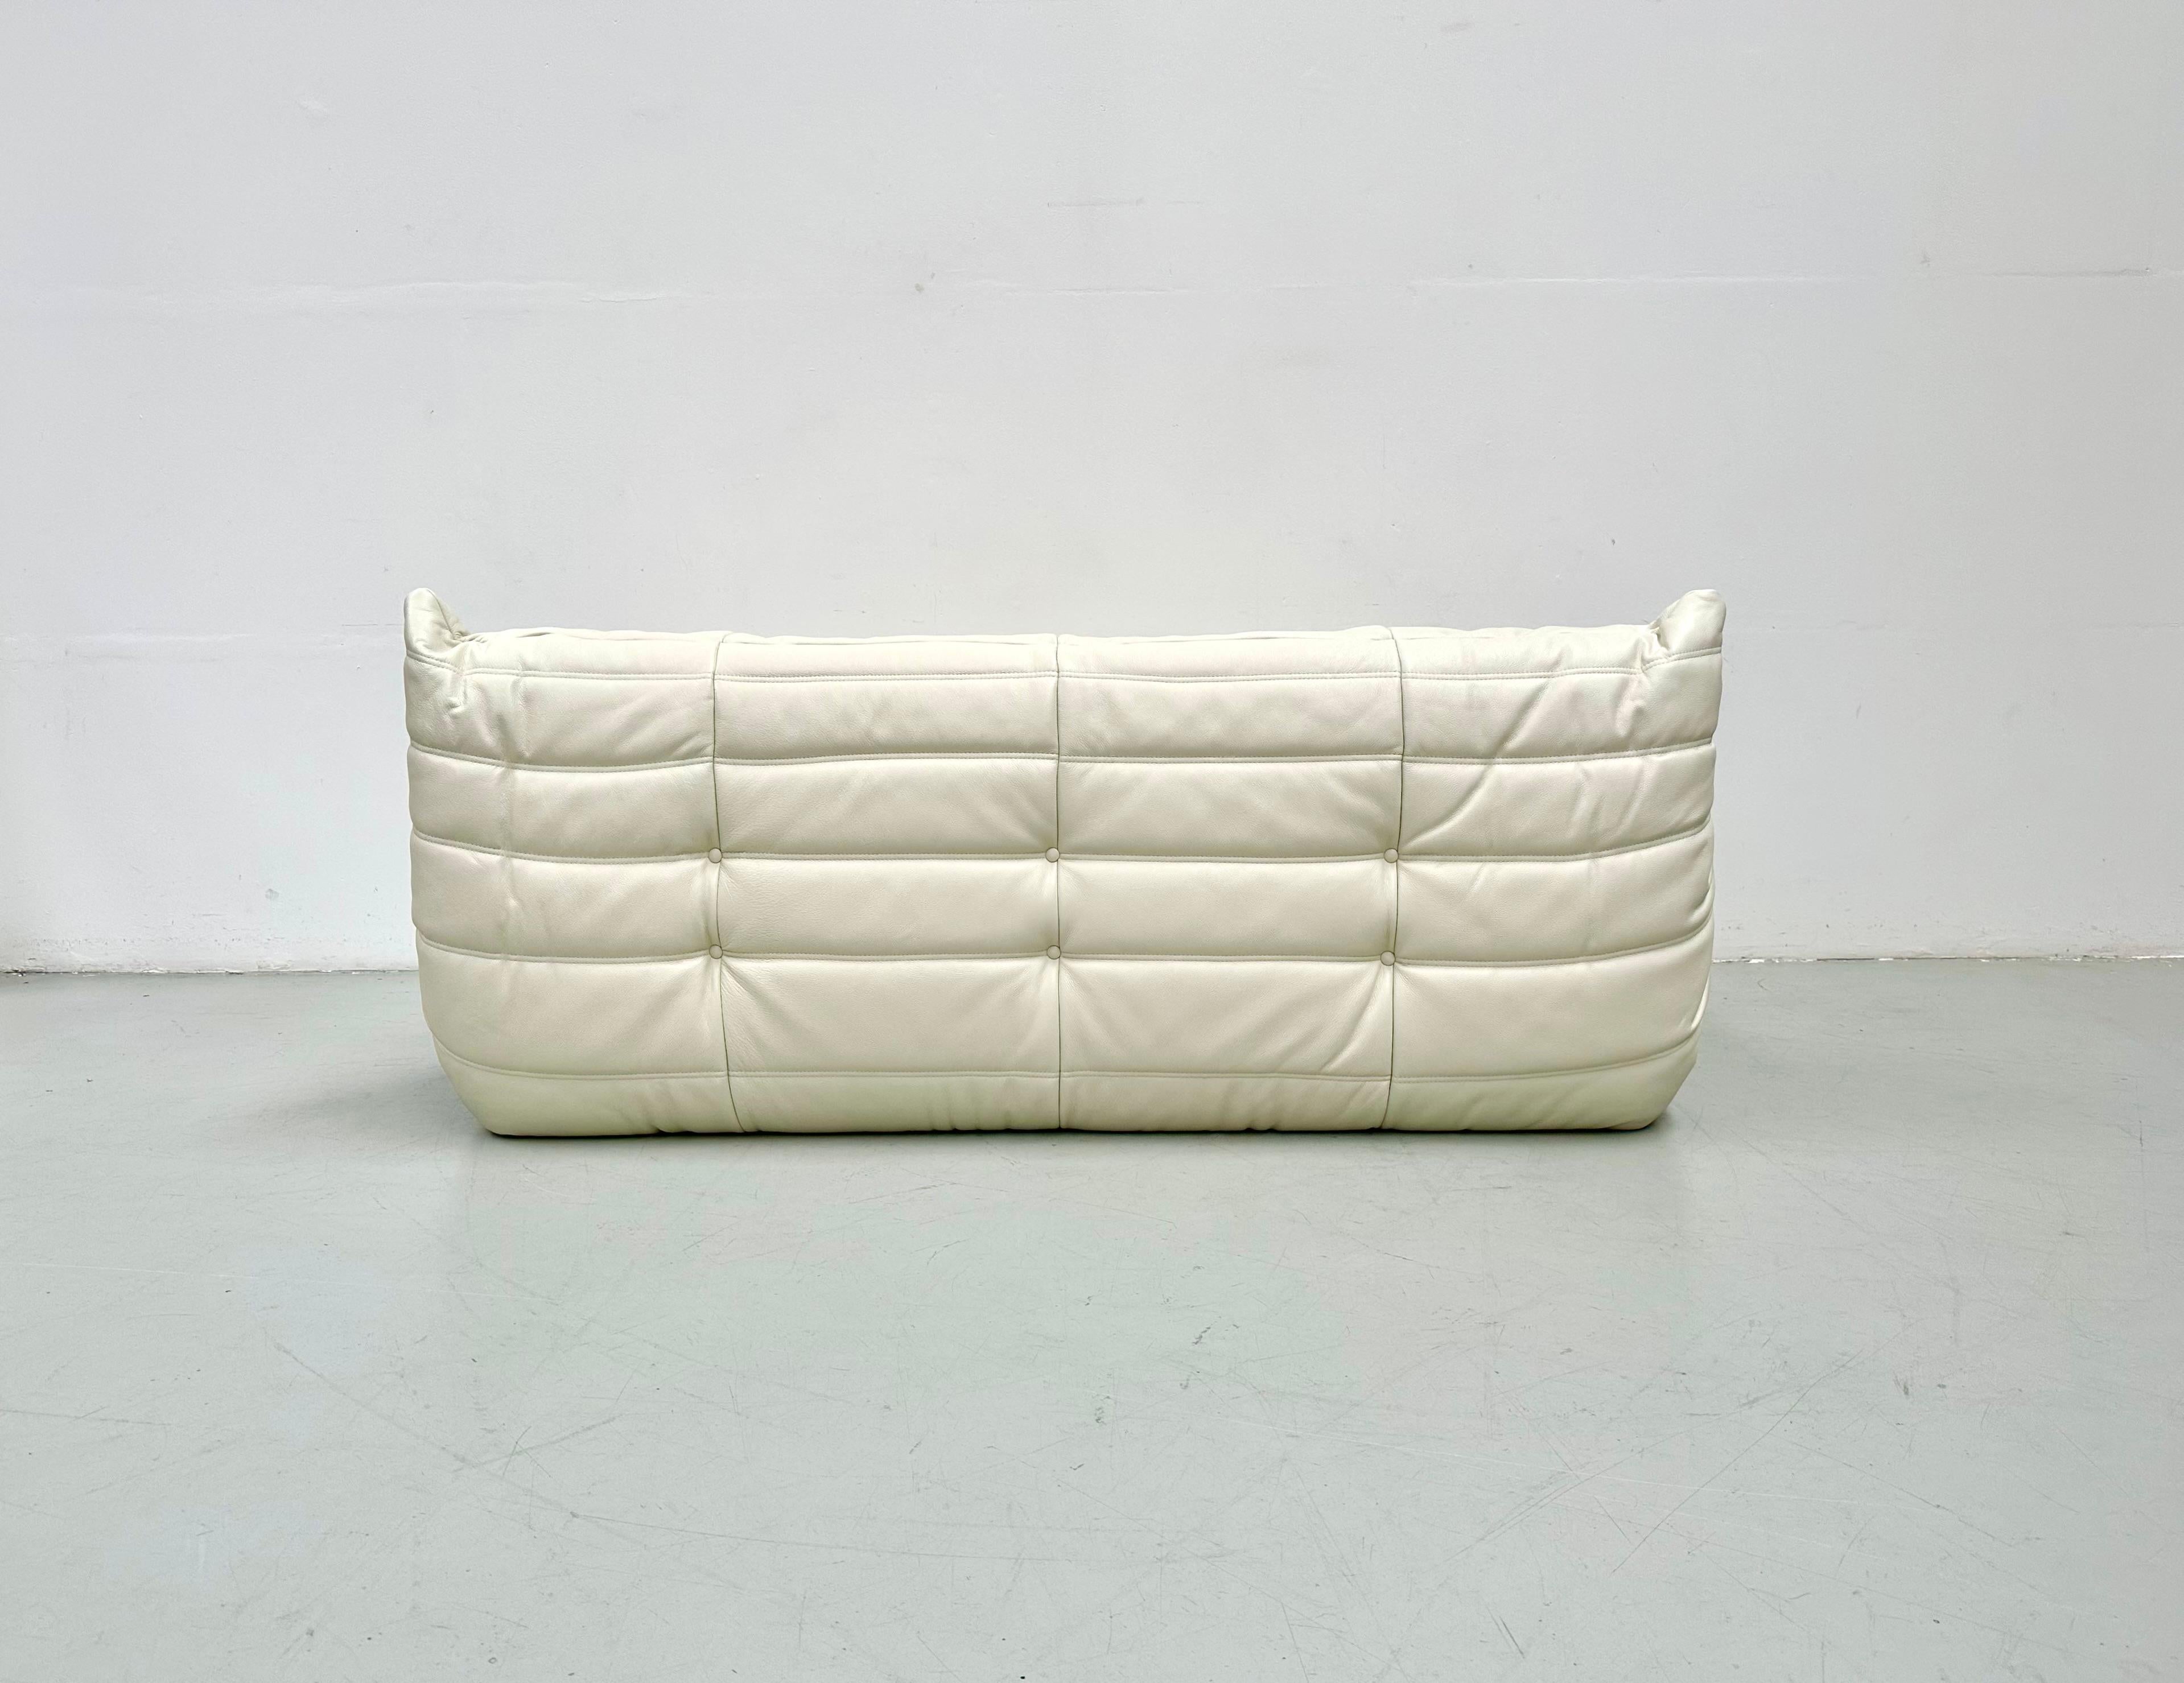 French Vintage Togo Sofa in White Leather by Michel Ducaroy for Ligne Roset. 3